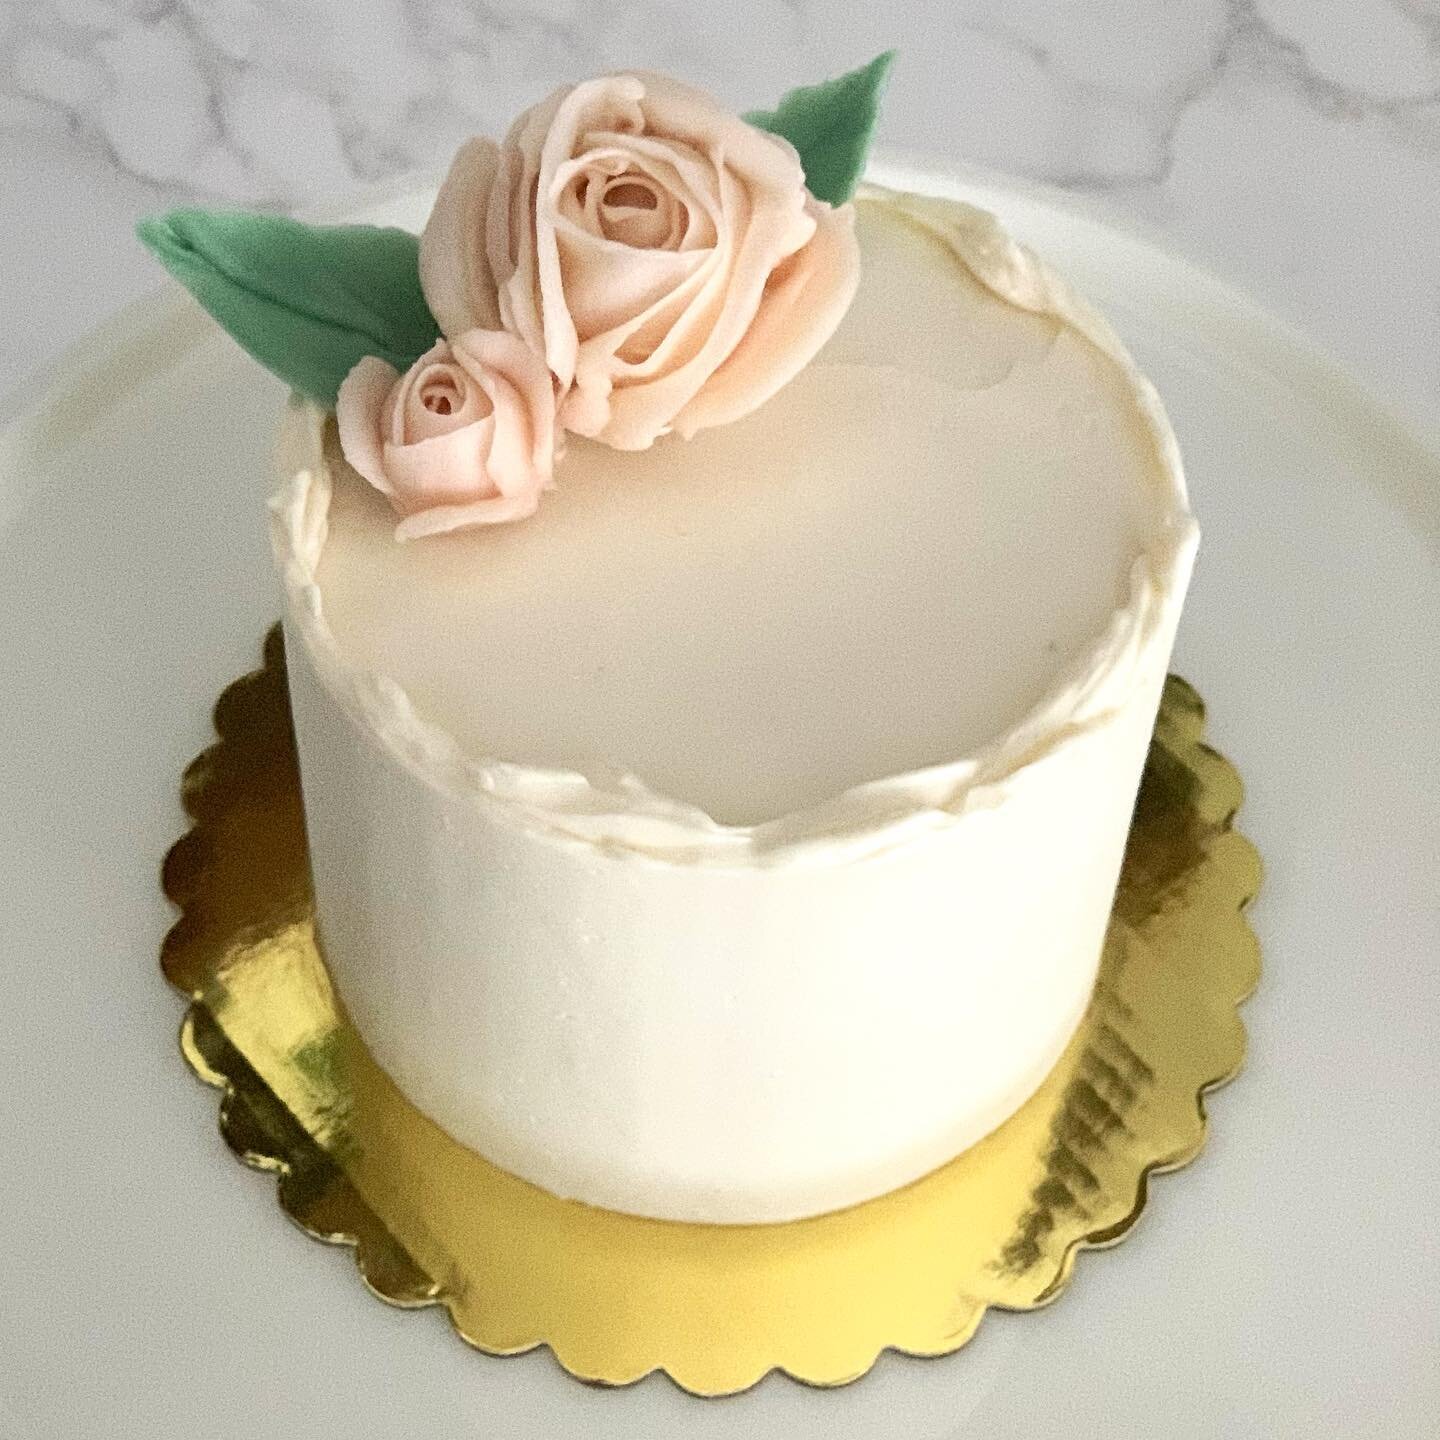 Valentine&rsquo;s Day is around the corner! Share this mini rose cake with a valentine, a galentine, or keep it all to yourself 🌹

Chocolate cake with vanilla buttercream, filled with a choice of blackberry compote or salted caramel, and topped with